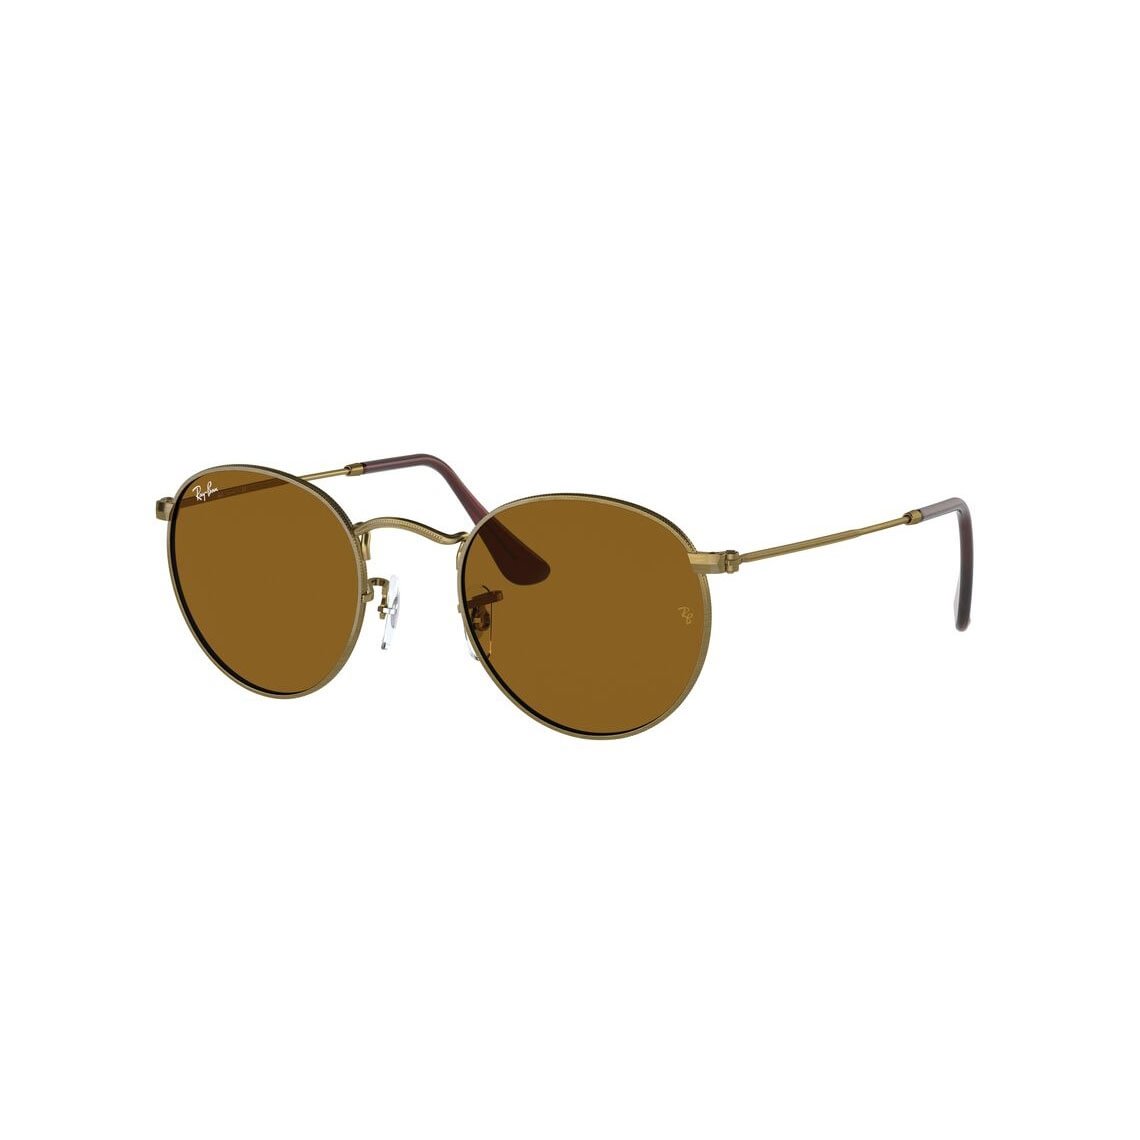 Ray-Ban Round Metal RB3447 922833 5021